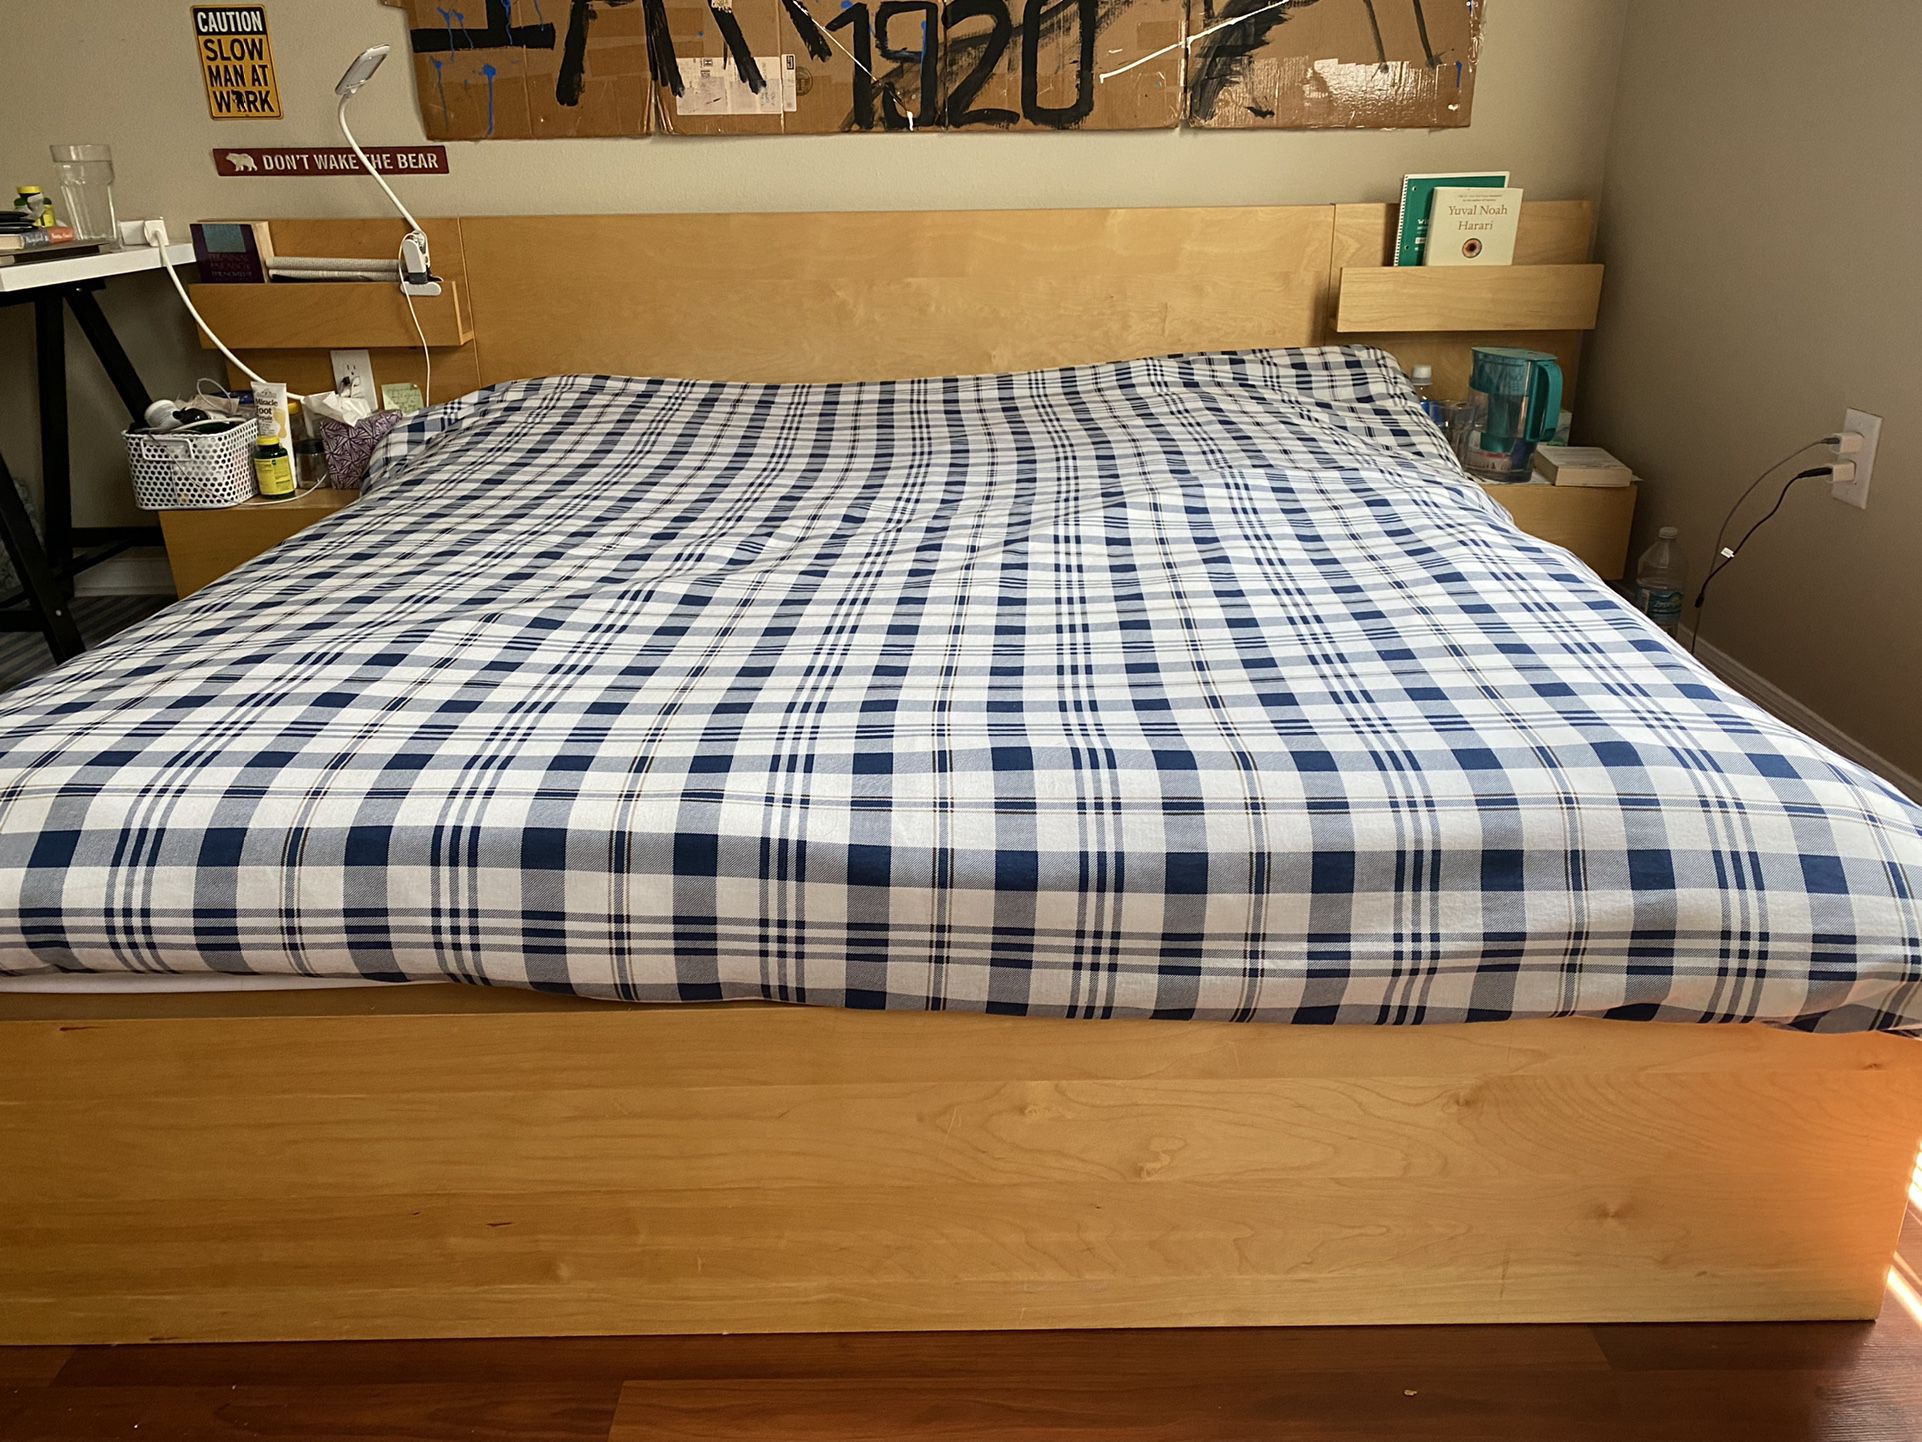 Ikea Malm Bed With Nightstands